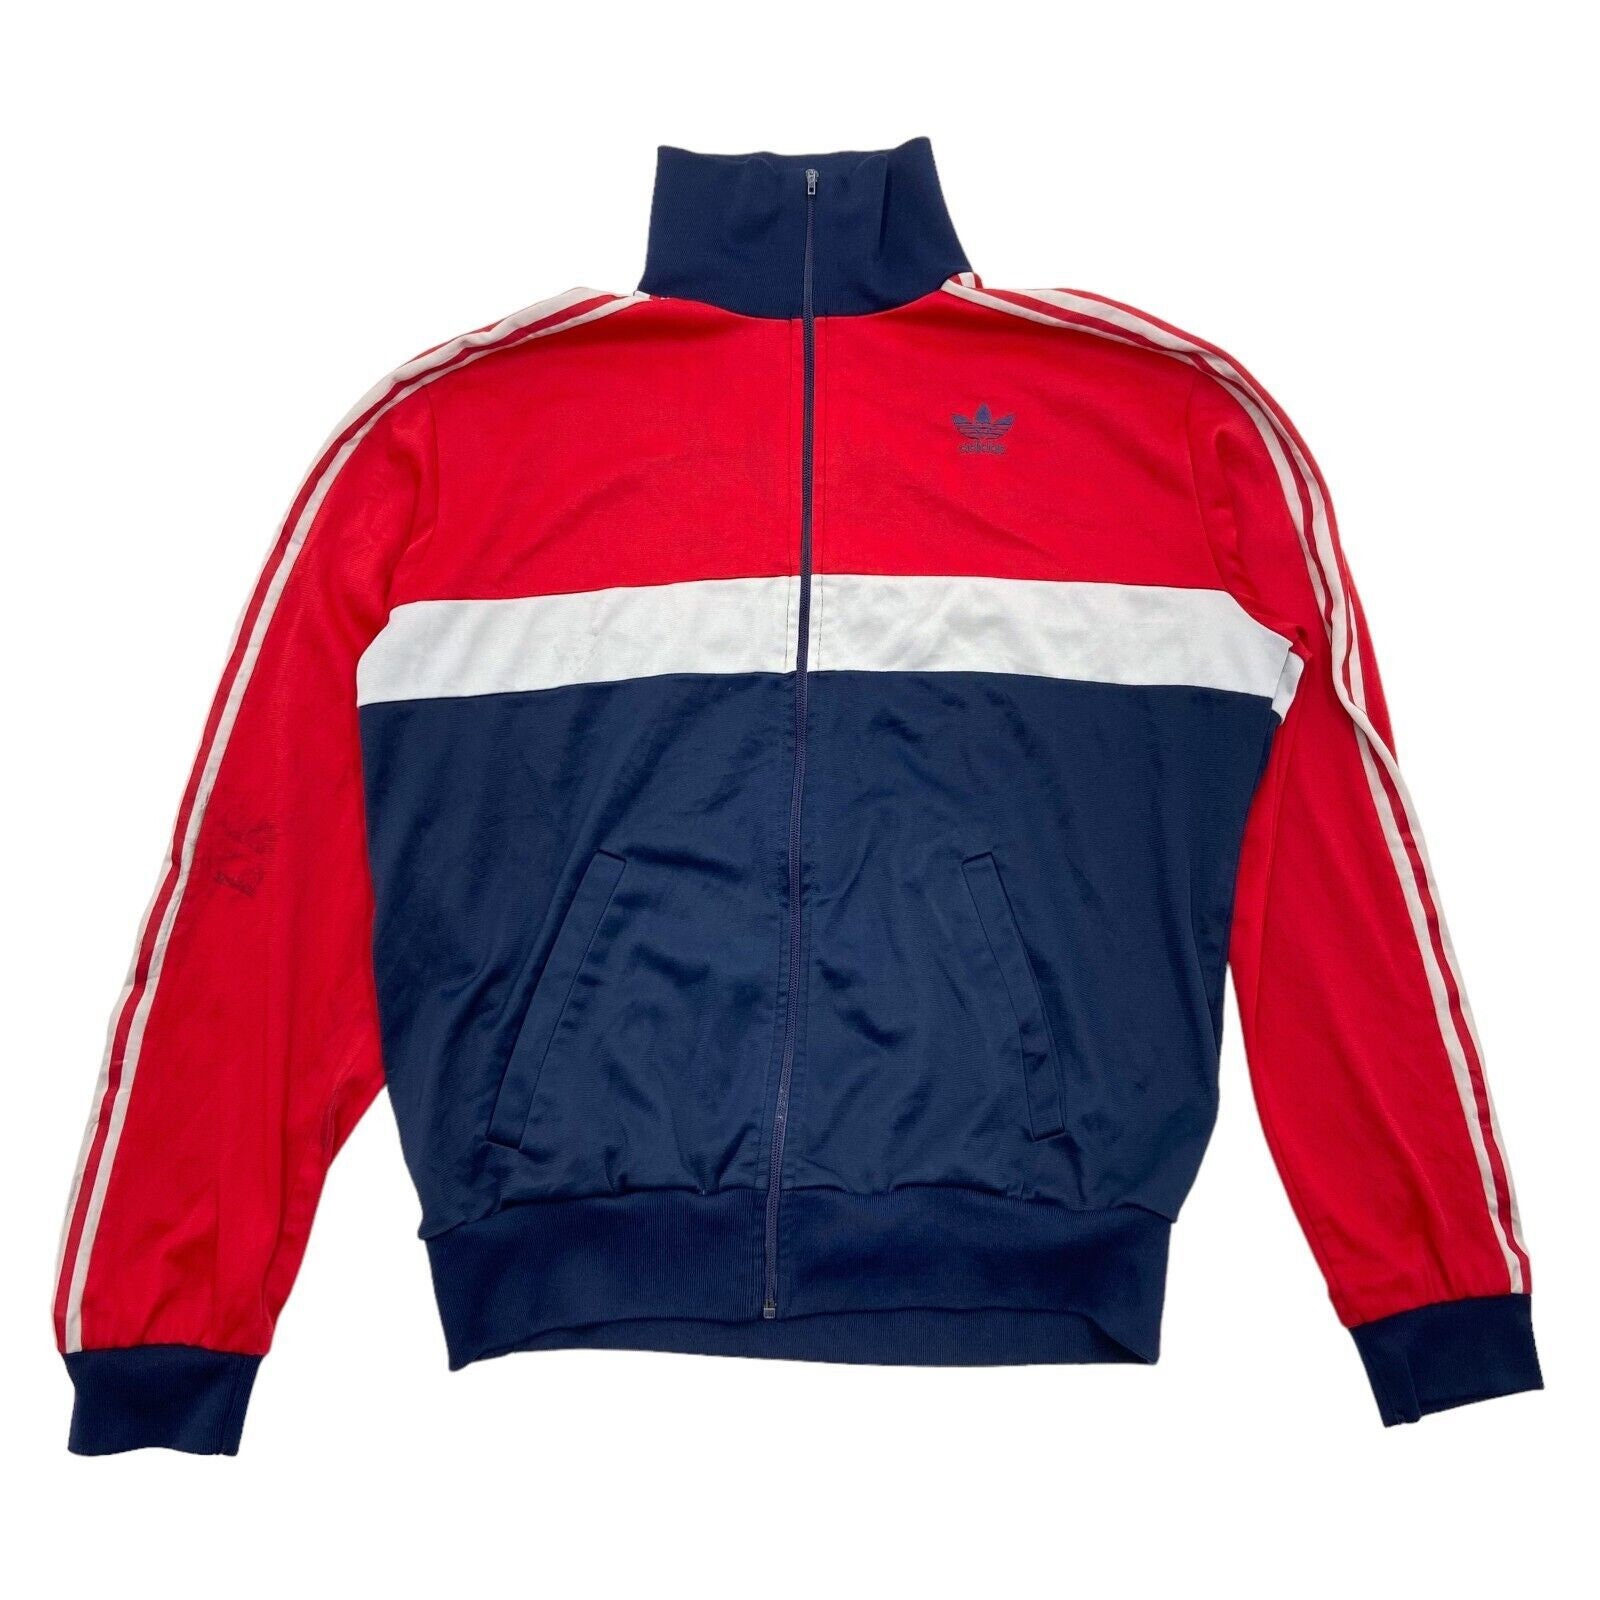 ADIDAS SPORT JACKET TRACK TOP VTG MADE IN YUGOSLAVIA 80s RED D4 SMALL RETRO  BLUE